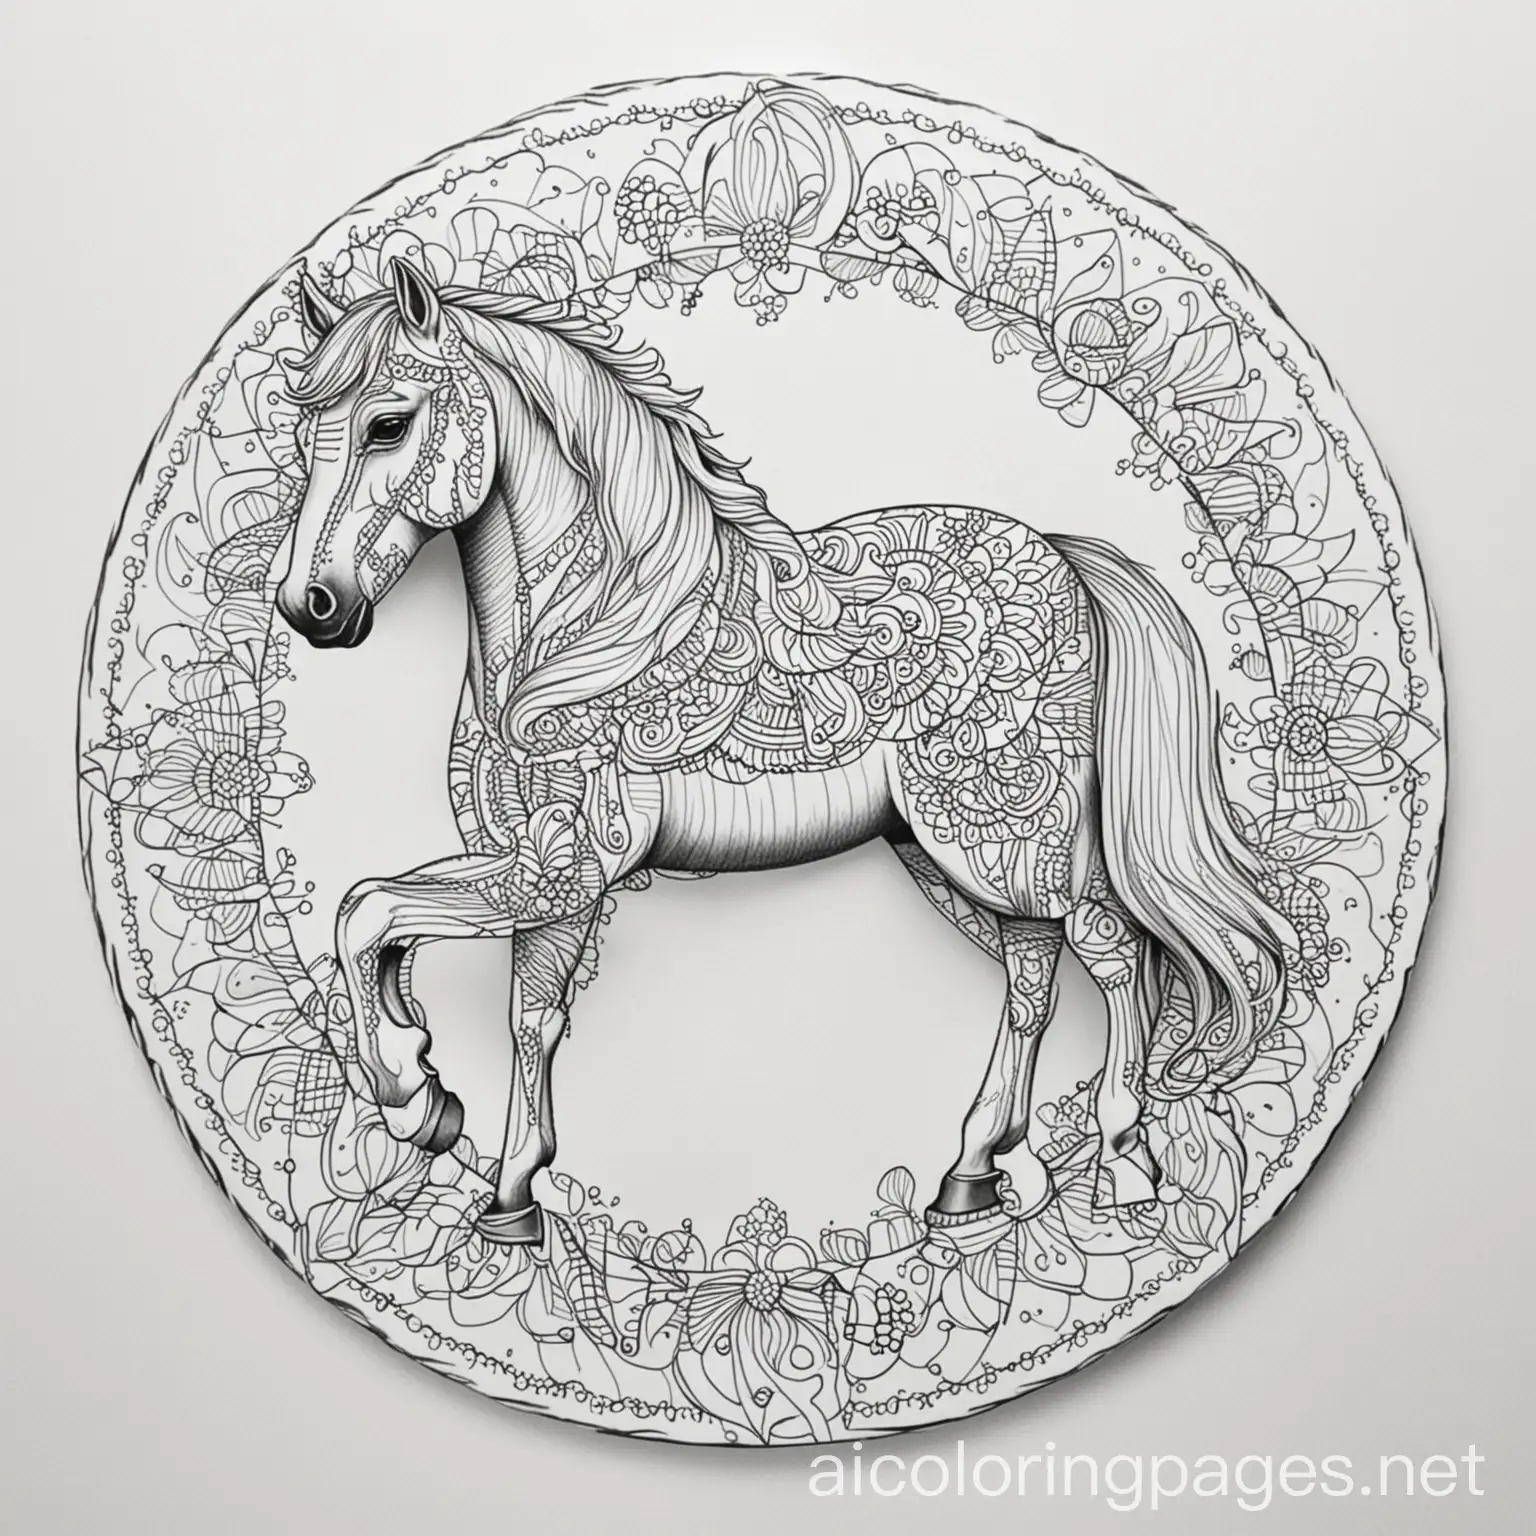 mandala horse, Coloring Page, black and white, line art, white background, Simplicity, Ample White Space. The background of the coloring page is plain white to make it easy for young children to color within the lines. The outlines of all the subjects are easy to distinguish, making it simple for kids to color without too much difficulty, Coloring Page, black and white, line art, white background, Simplicity, Ample White Space. The background of the coloring page is plain white to make it easy for young children to color within the lines. The outlines of all the subjects are easy to distinguish, making it simple for kids to color without too much difficulty